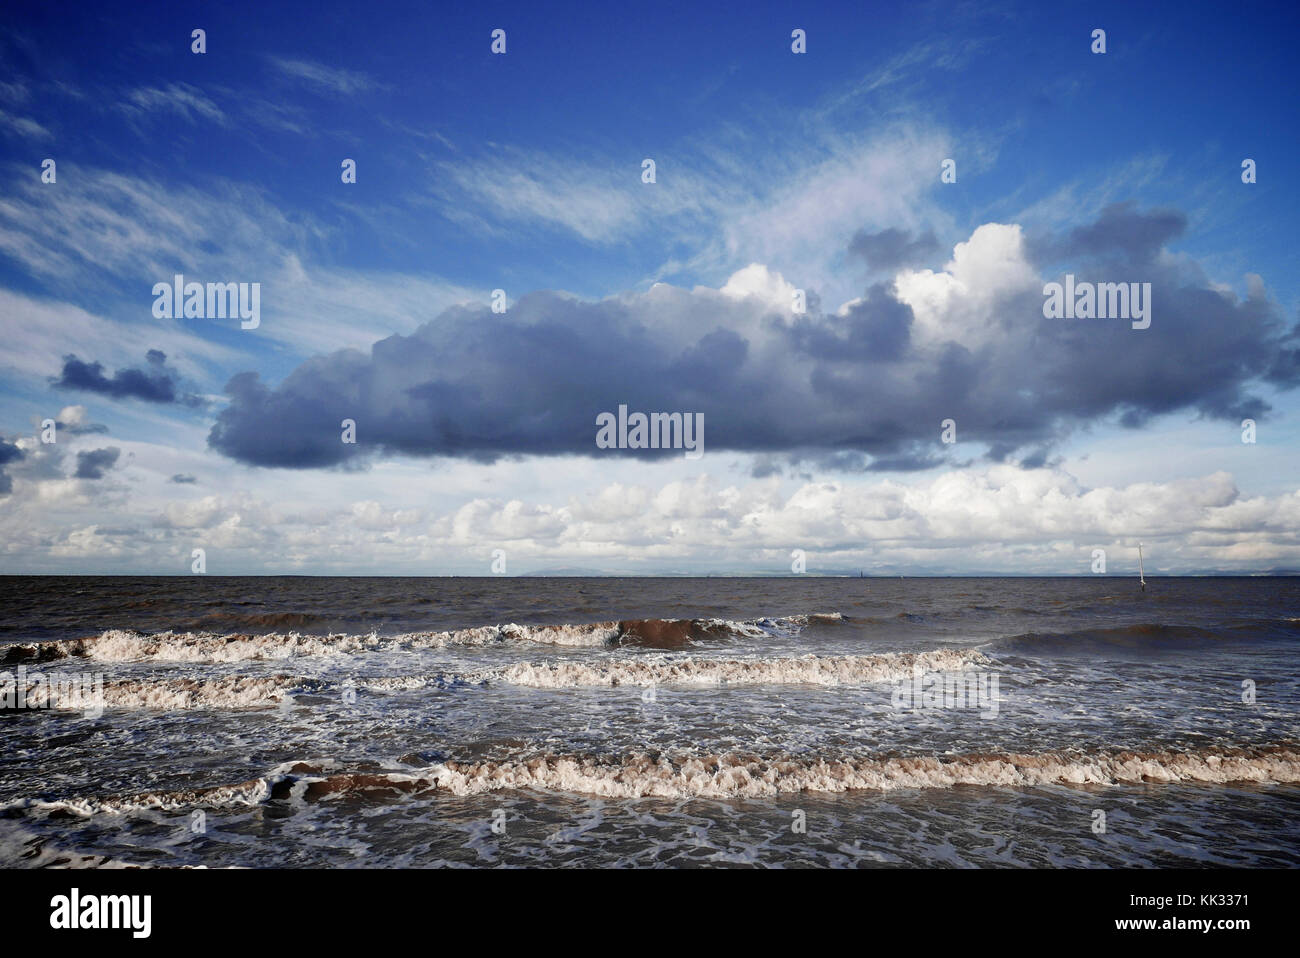 Storm clouds over a dark rough sea in winter Stock Photo